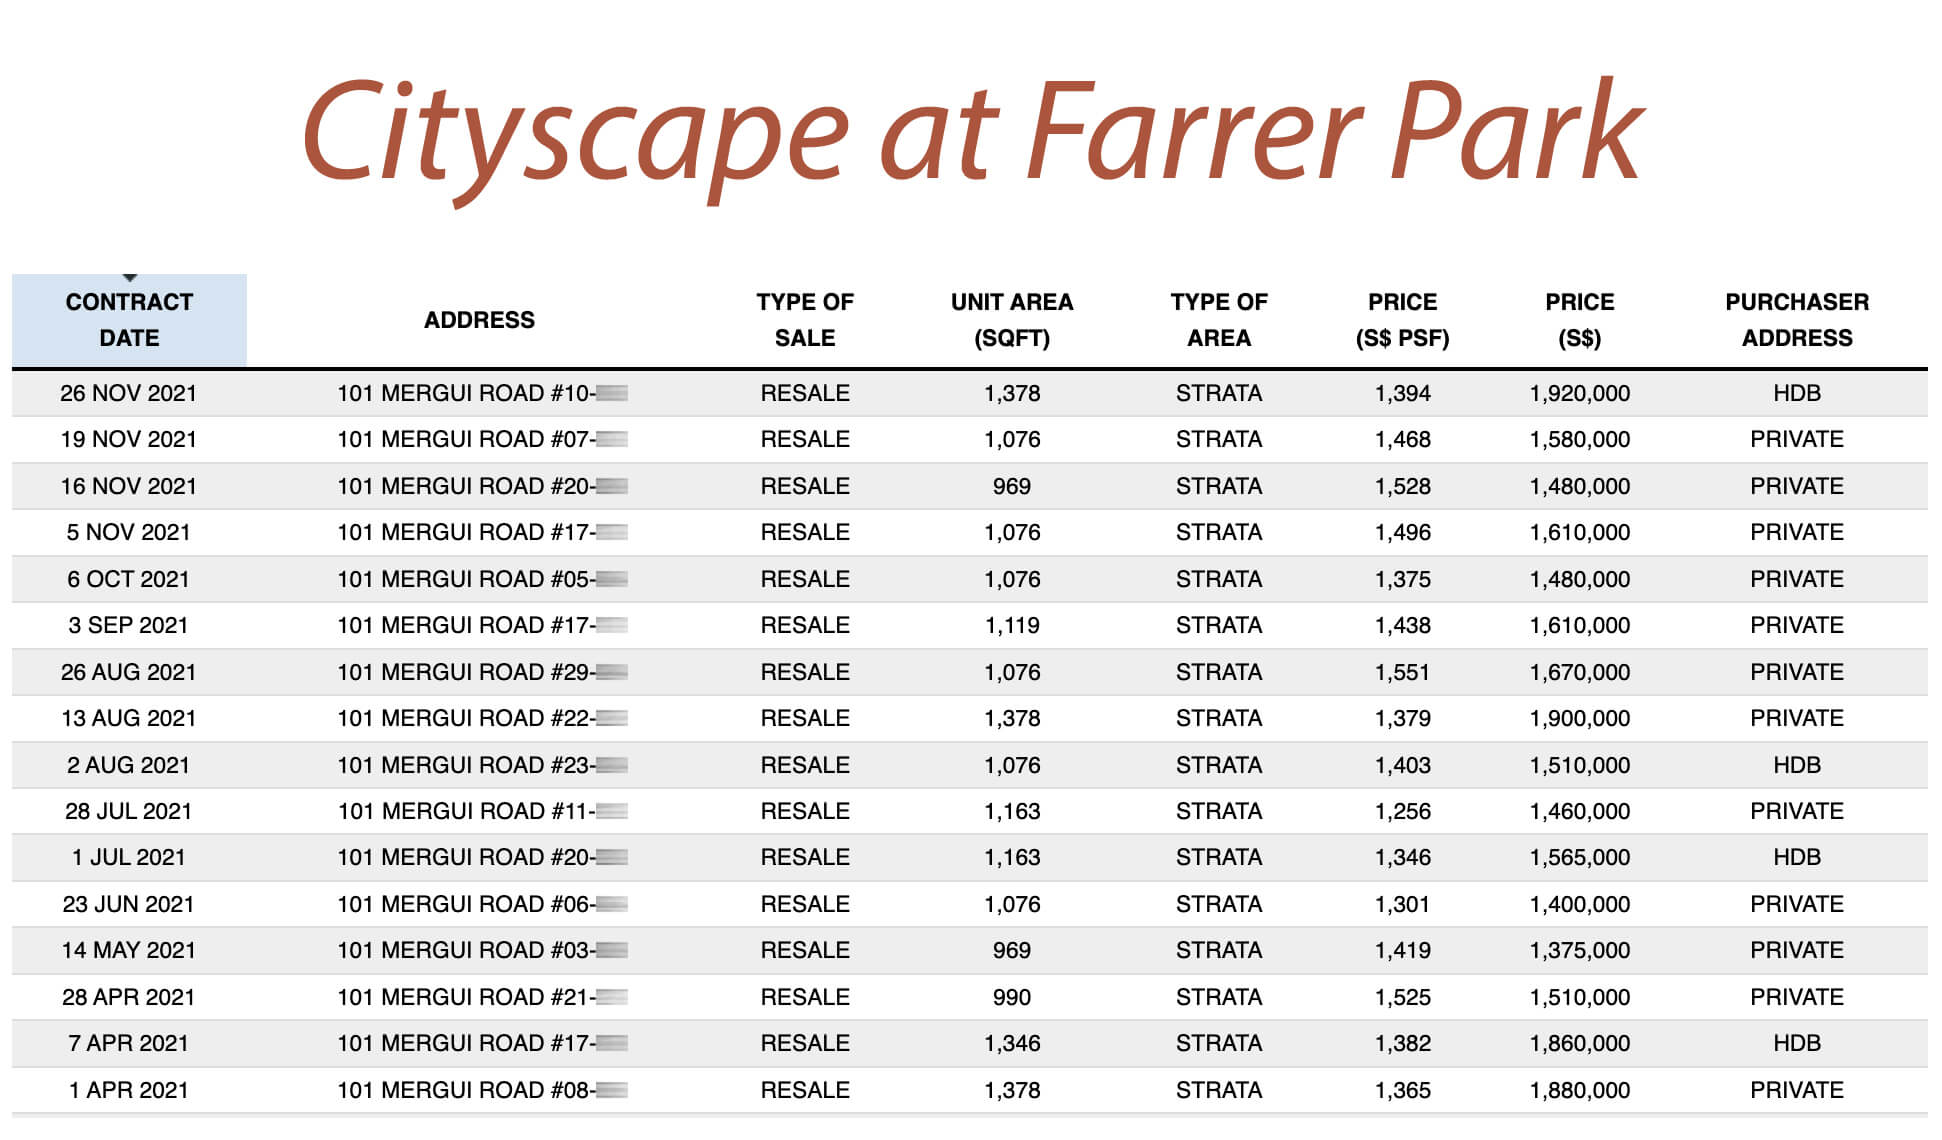 Cityscape at Farrer Park Transactions Apr 21 to 22